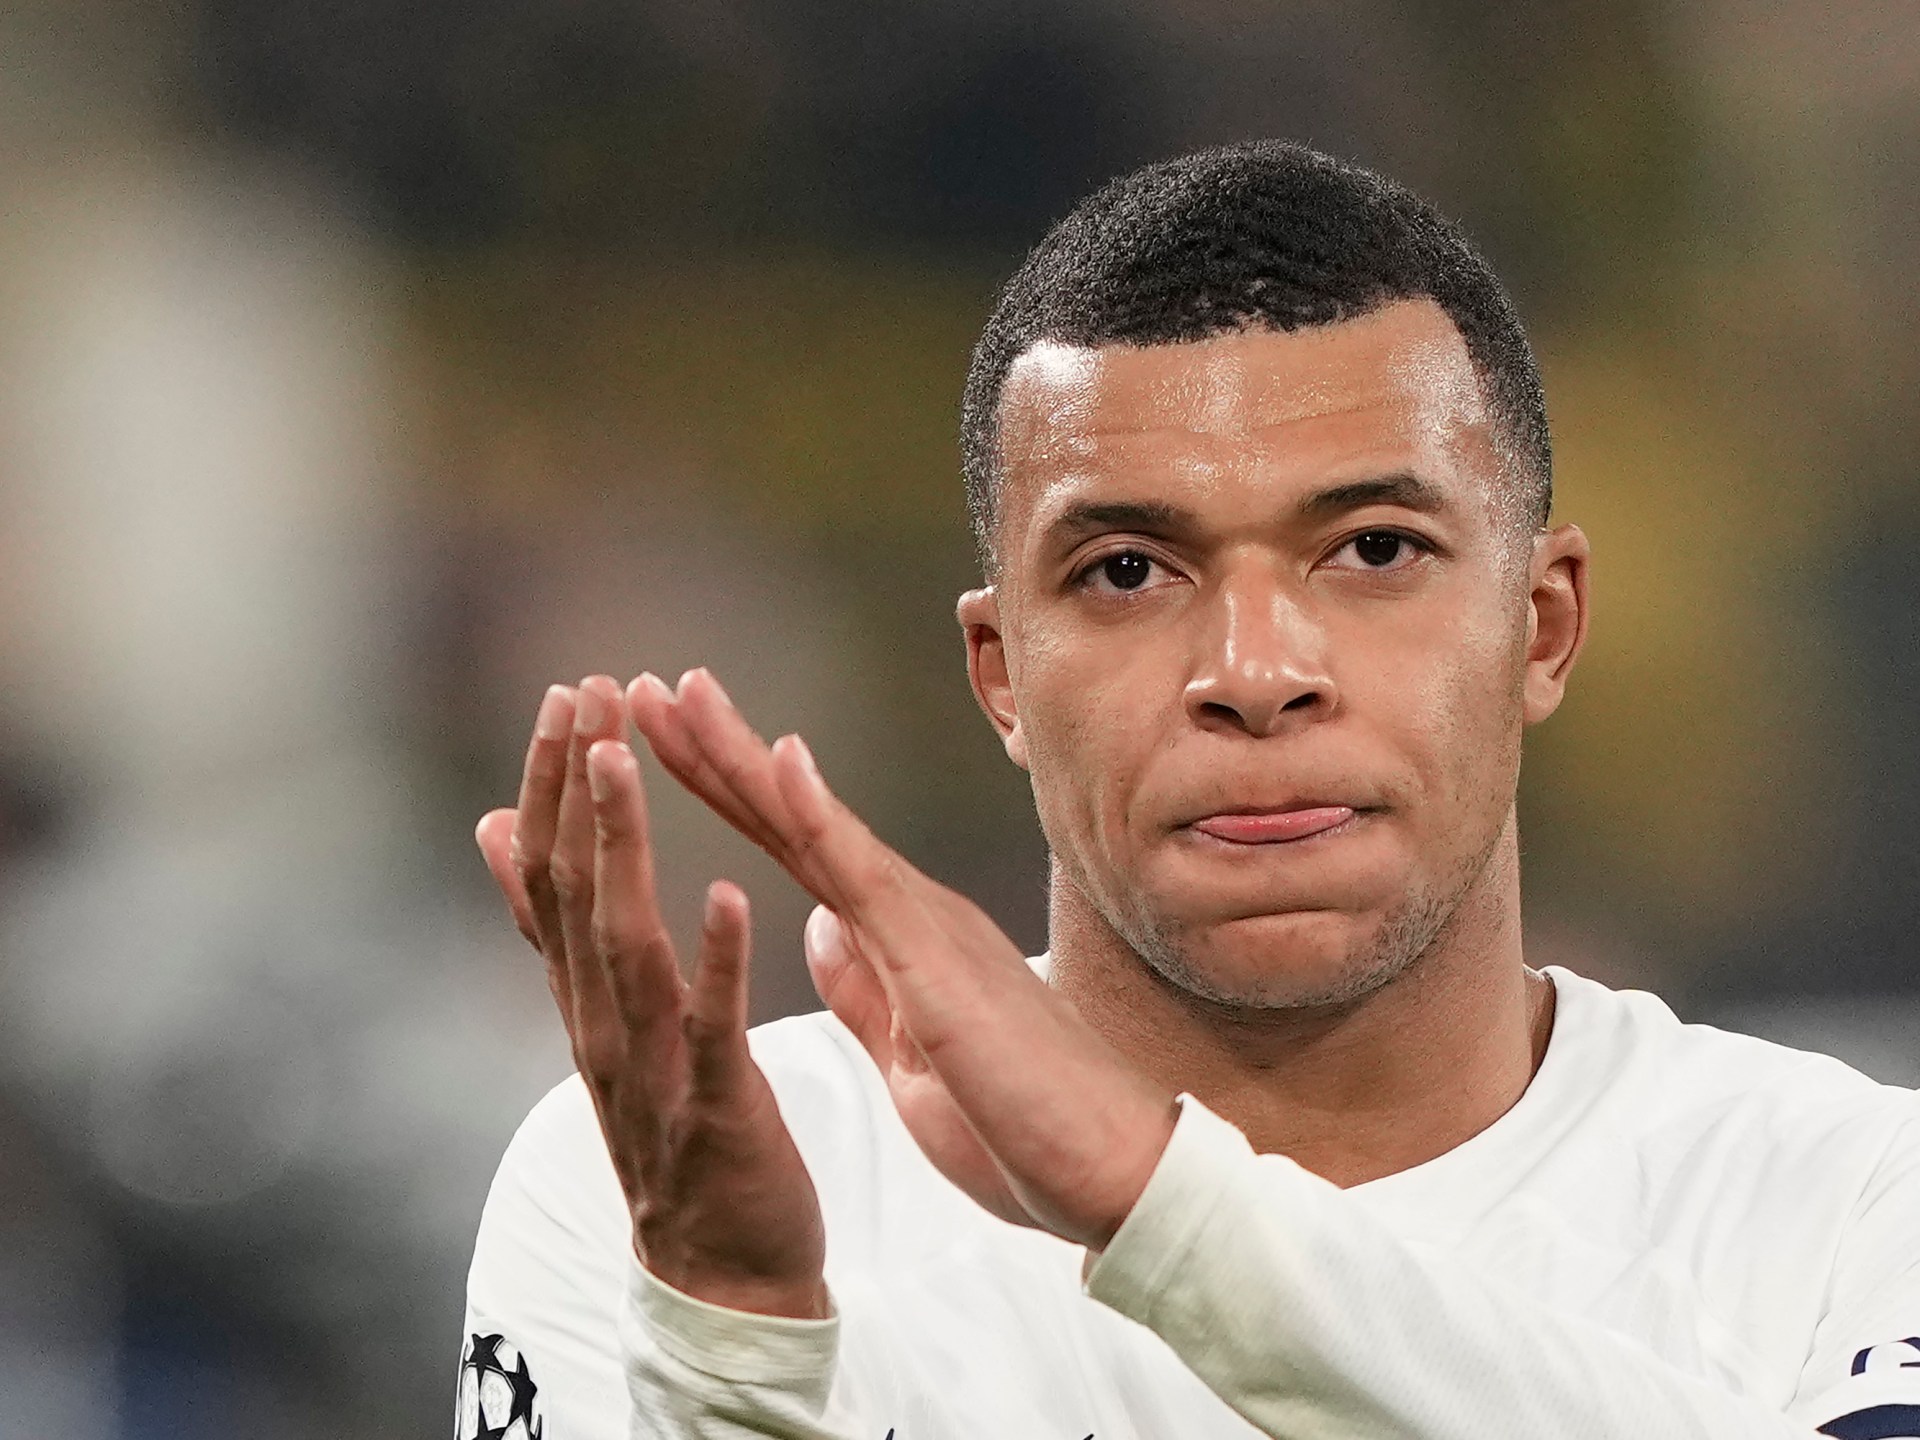 PSG’s Mbappe undecided on club future as contract winds down | Football News